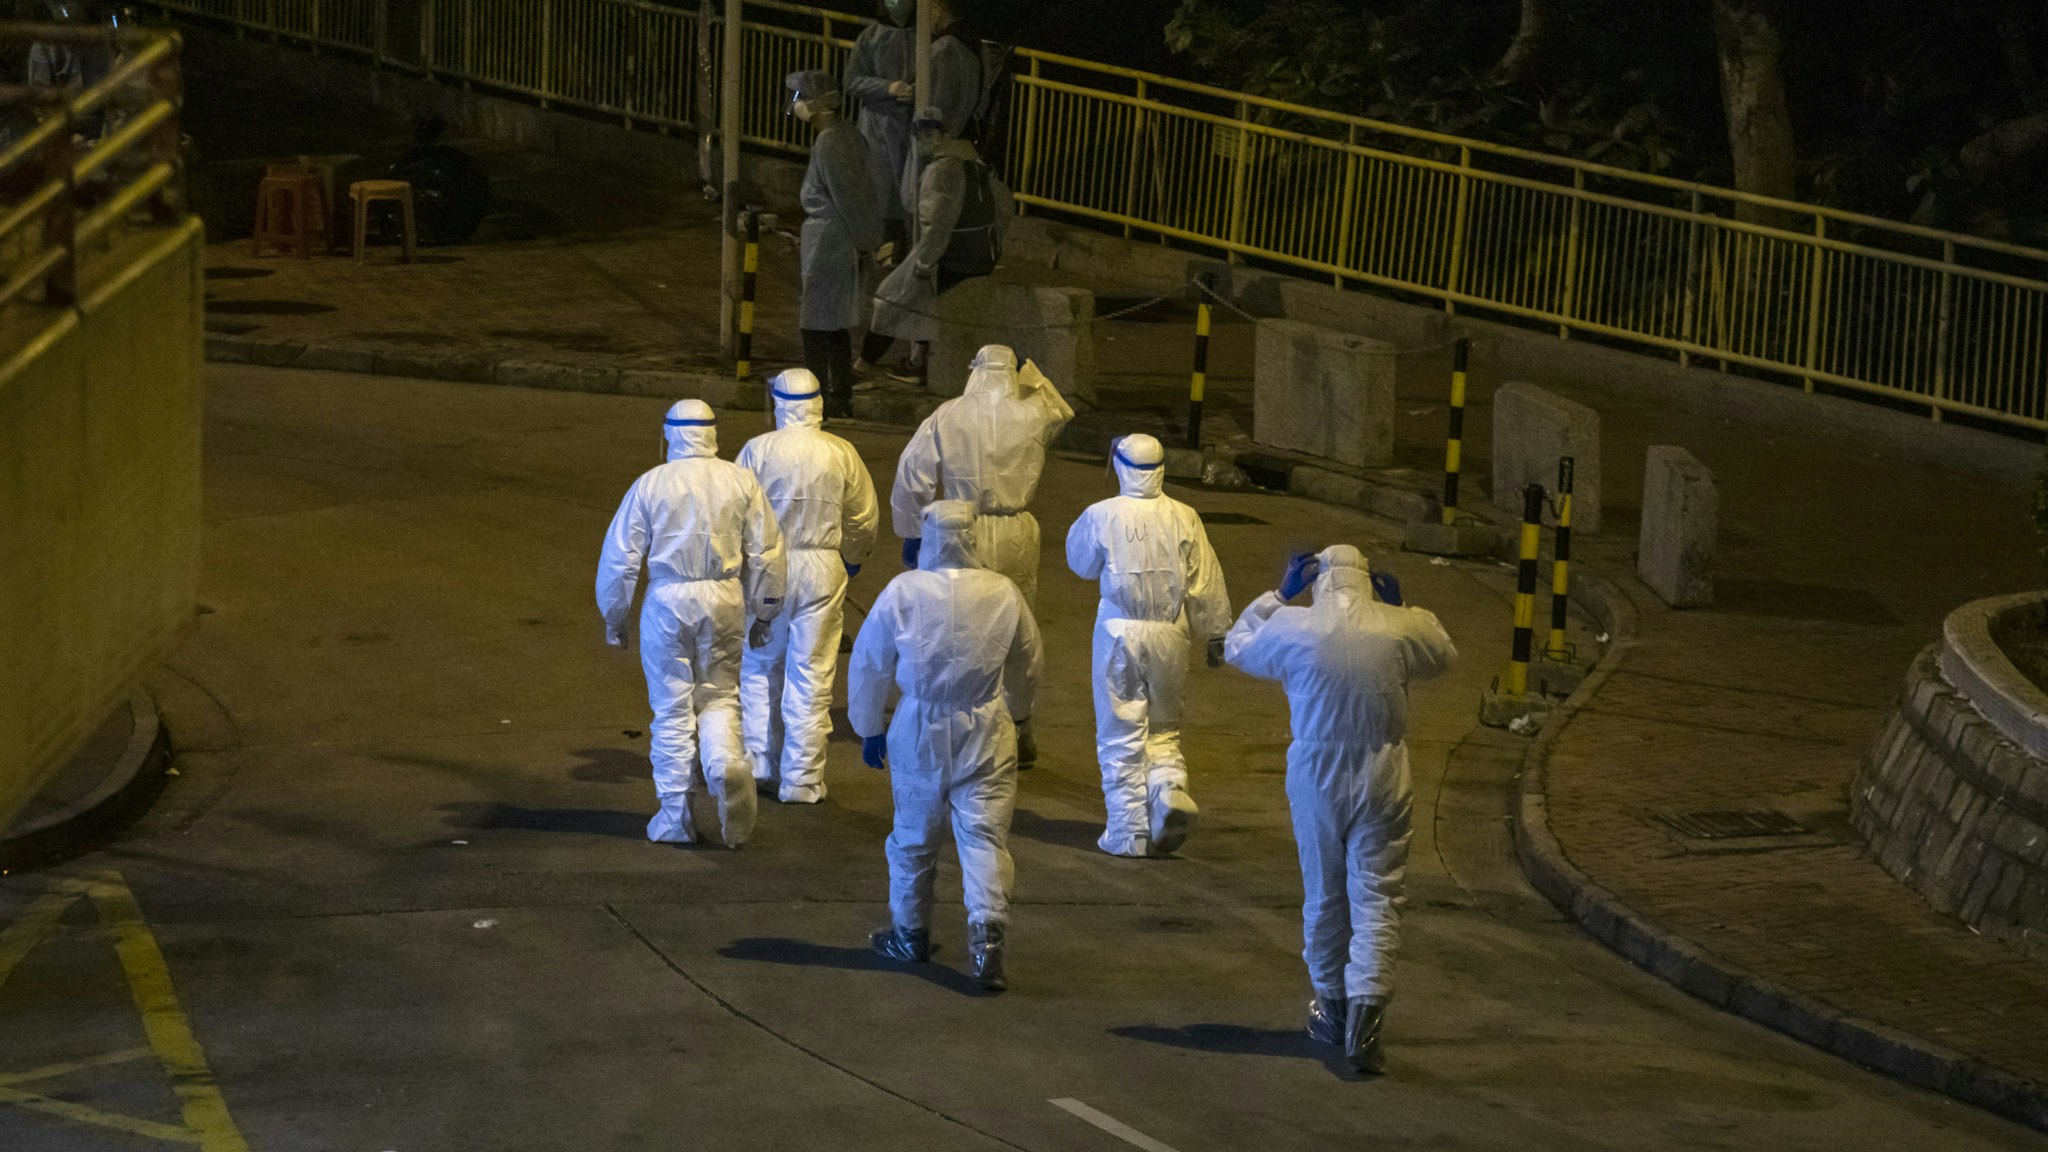 Officials wearing protective gear walk through Cheung Hong Estate in the Tsing Yi district of Hong Kong, China, in the early morning of Tuesday, Feb. 11, 2020. The Hong Kong government has evacuated some residents at a building where two patients have been confirmed to have the coronavirus infection, according to Wong Ka-Hing, controller at the Centre for Health Protection.